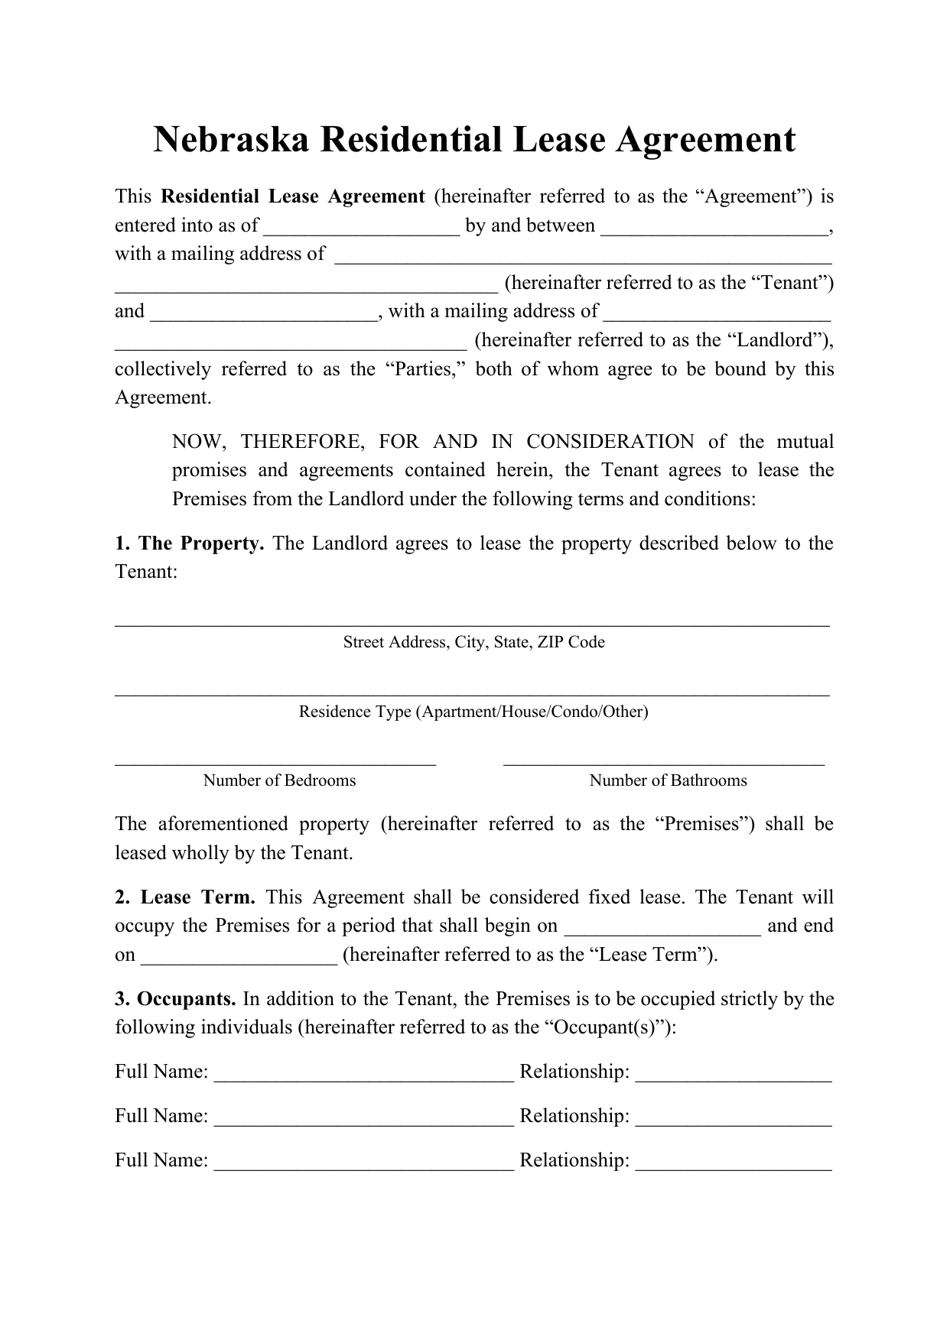 Residential Lease Agreement Template - Nebraska, Page 1